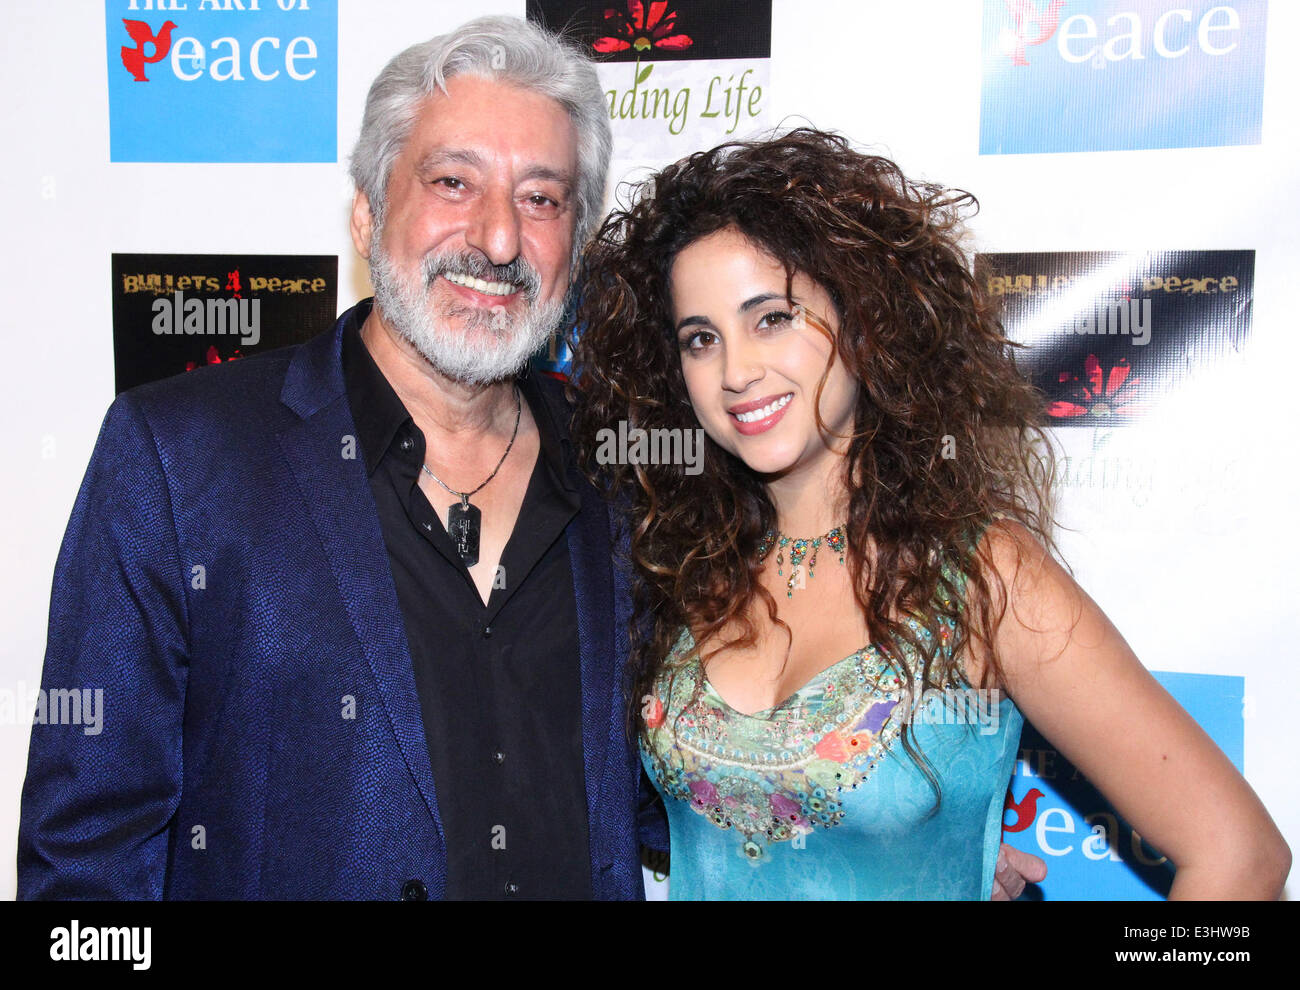 Reloading Life: The Art of Peace, Anti Gun Violence event held at The Supperclub - Arrivals  Featuring: Ebi Hamedi,Liel Kolet Where: Los Angeles, California, United States When: 22 Nov 2013 Stock Photo